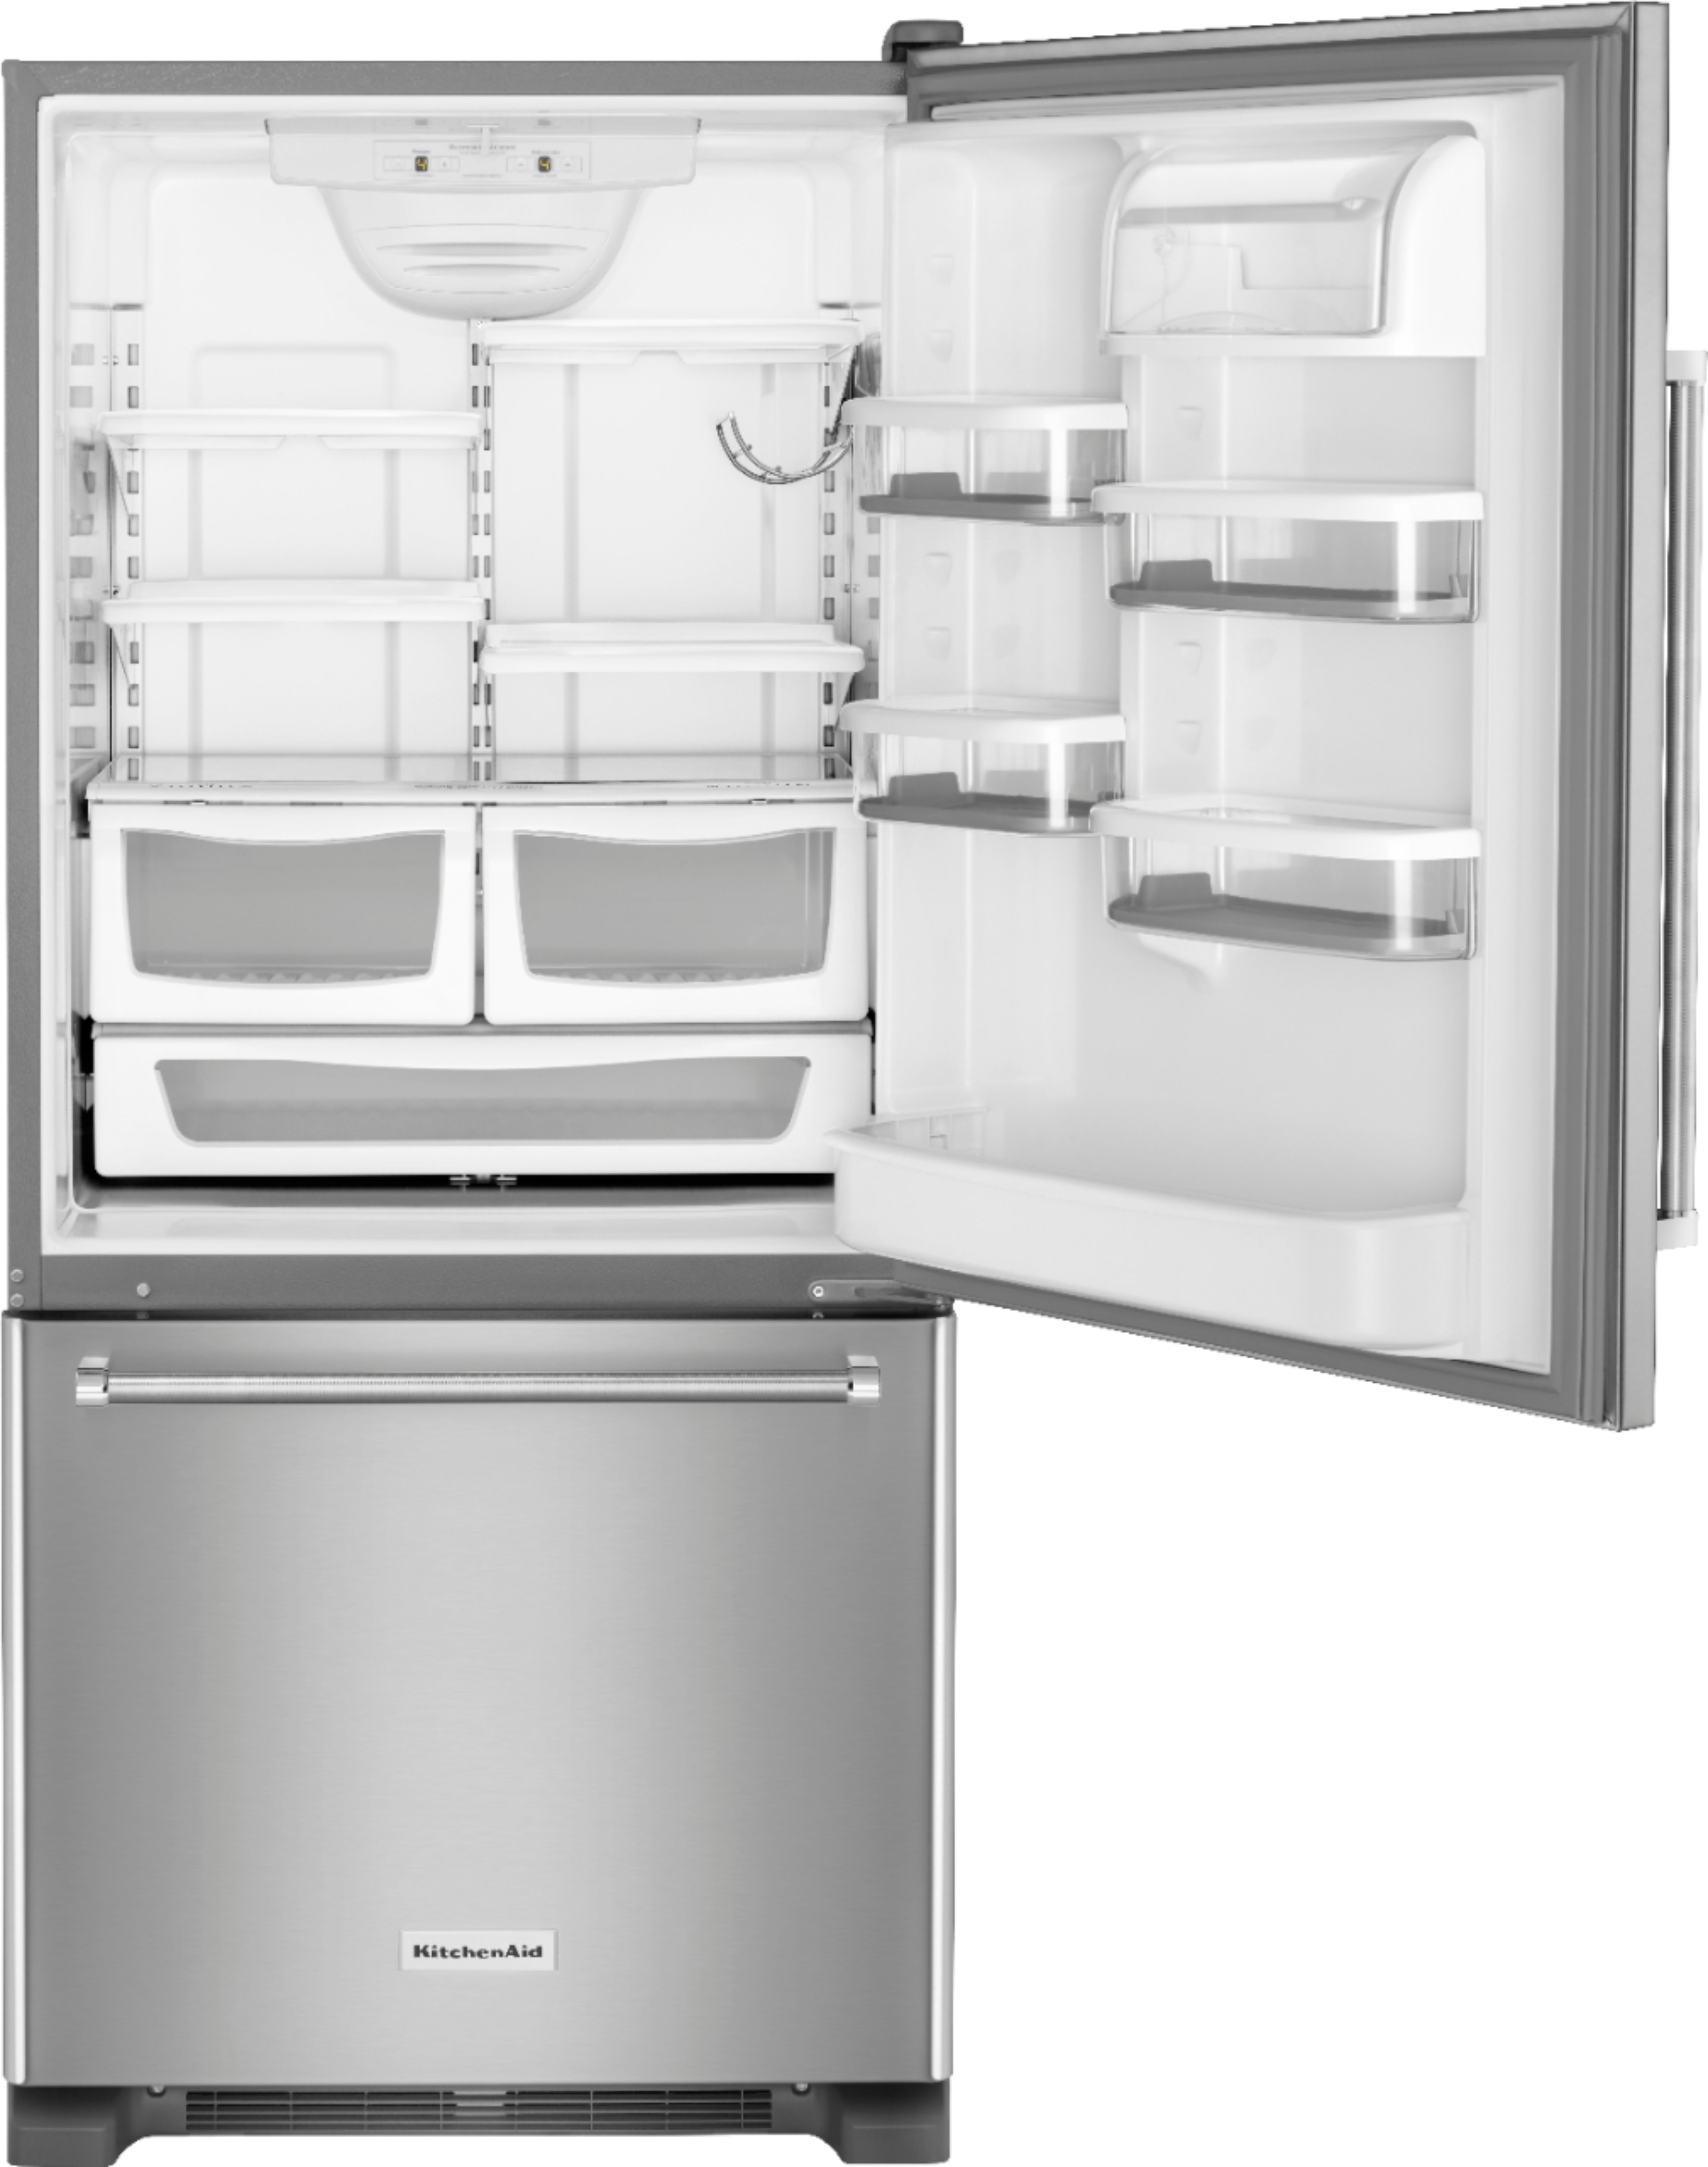 Questions and Answers: KitchenAid 19 Cu. Ft. Bottom-Freezer ...